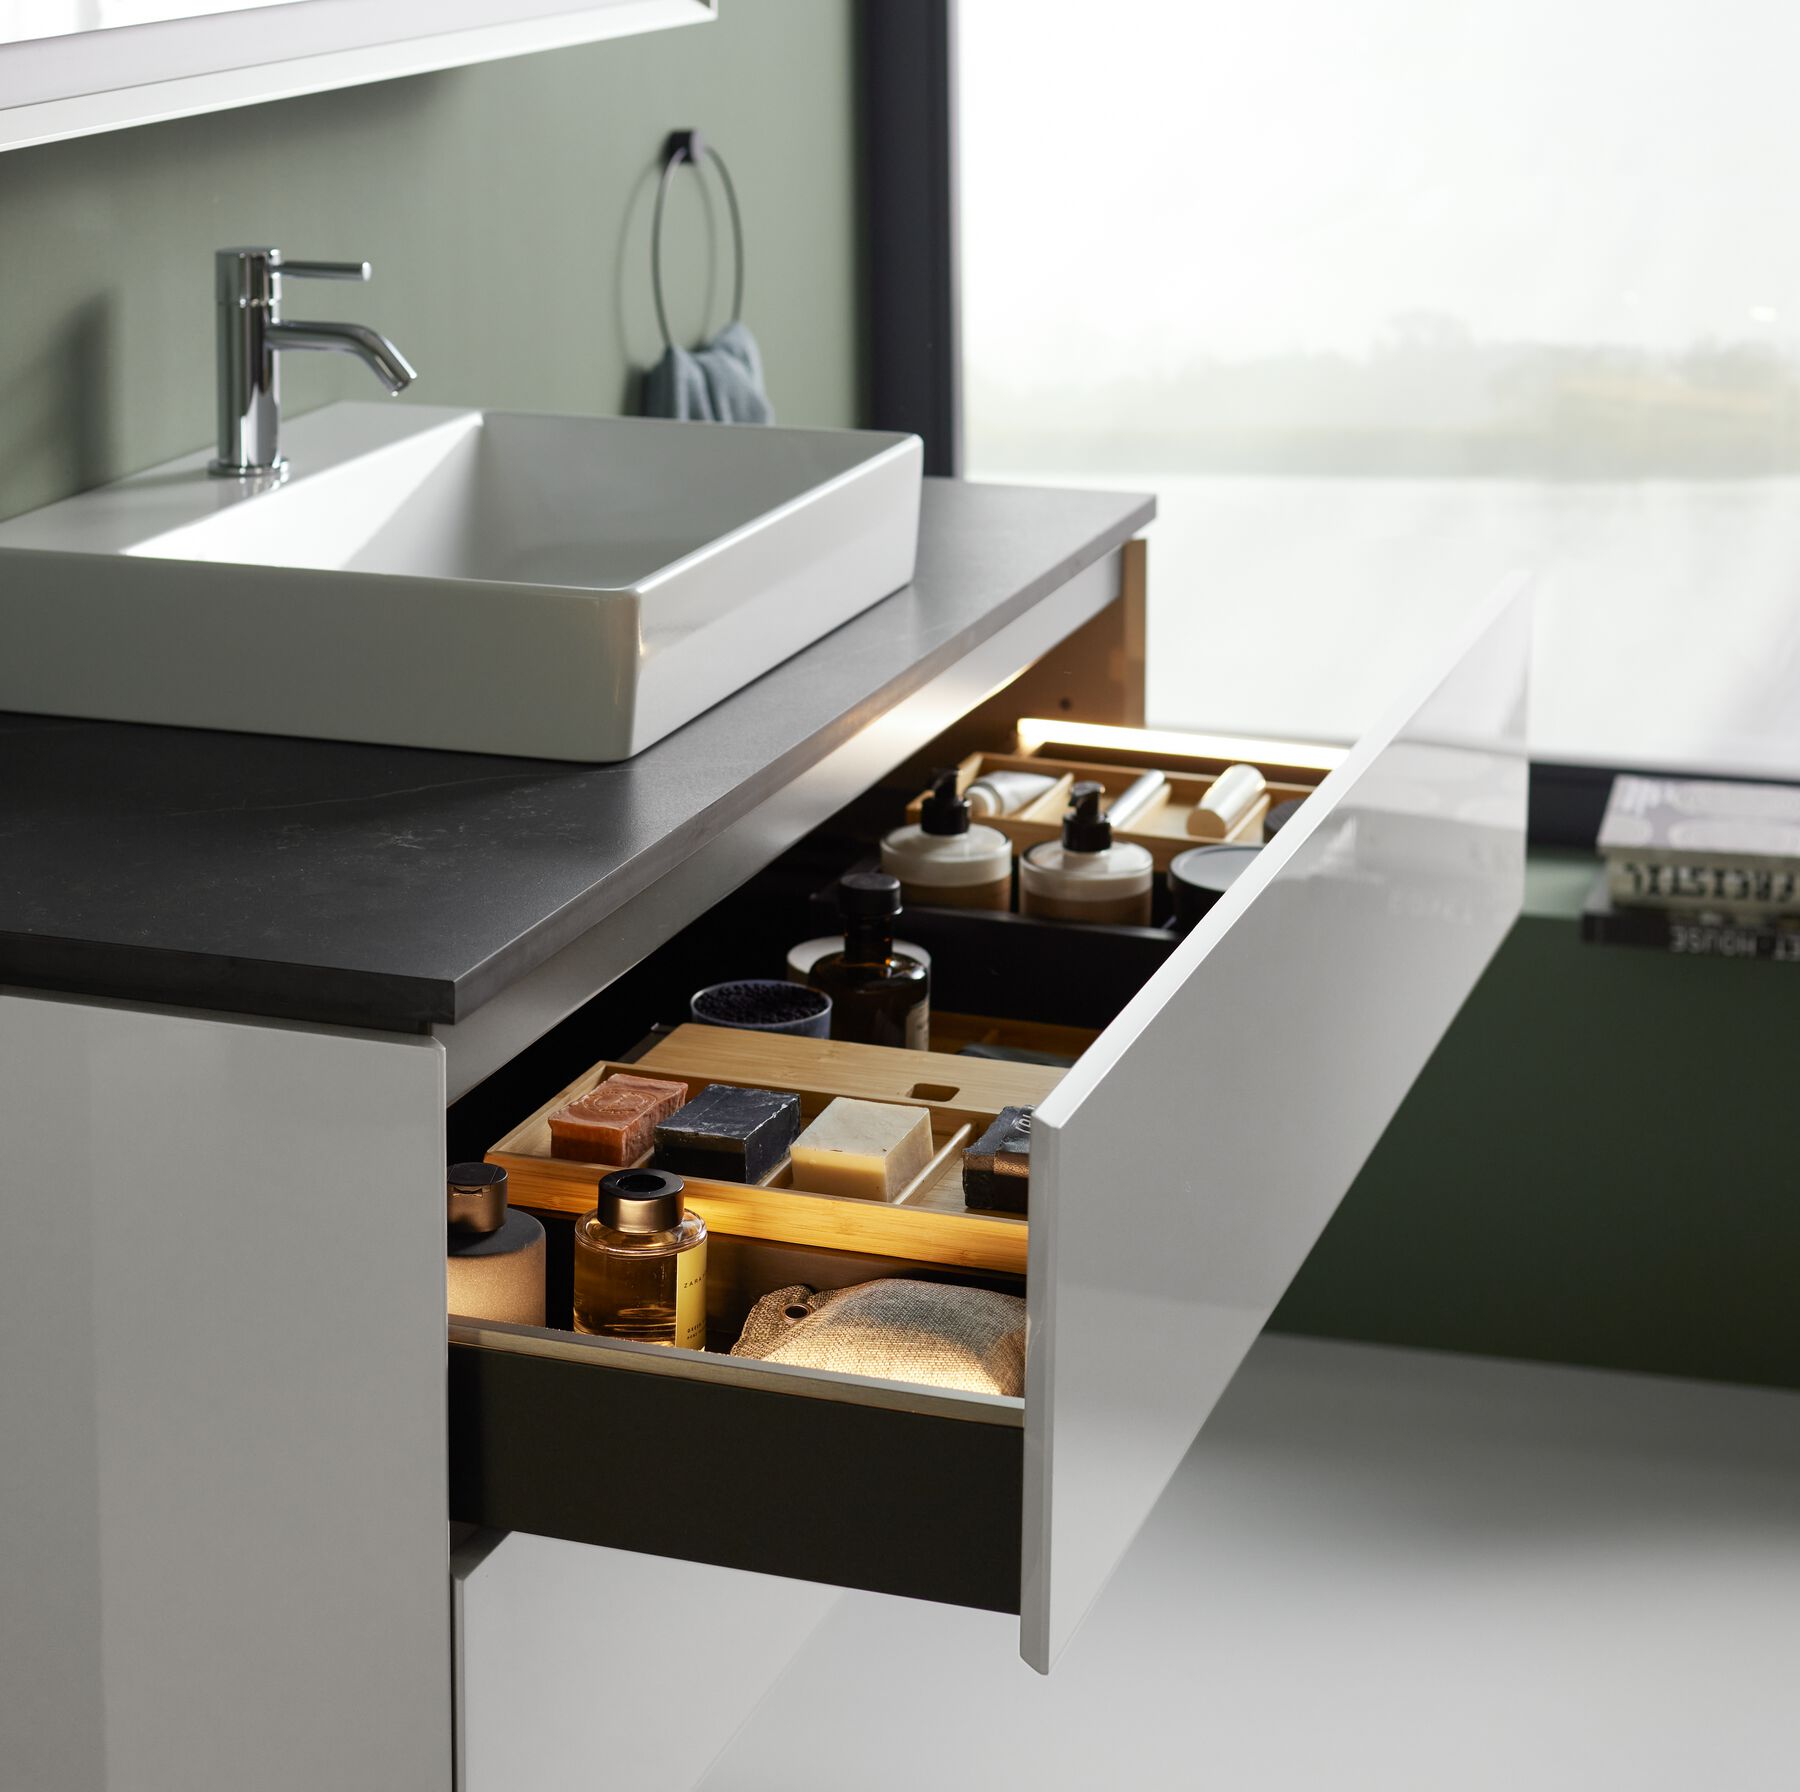 Geberit expands its offering with brand new product launches